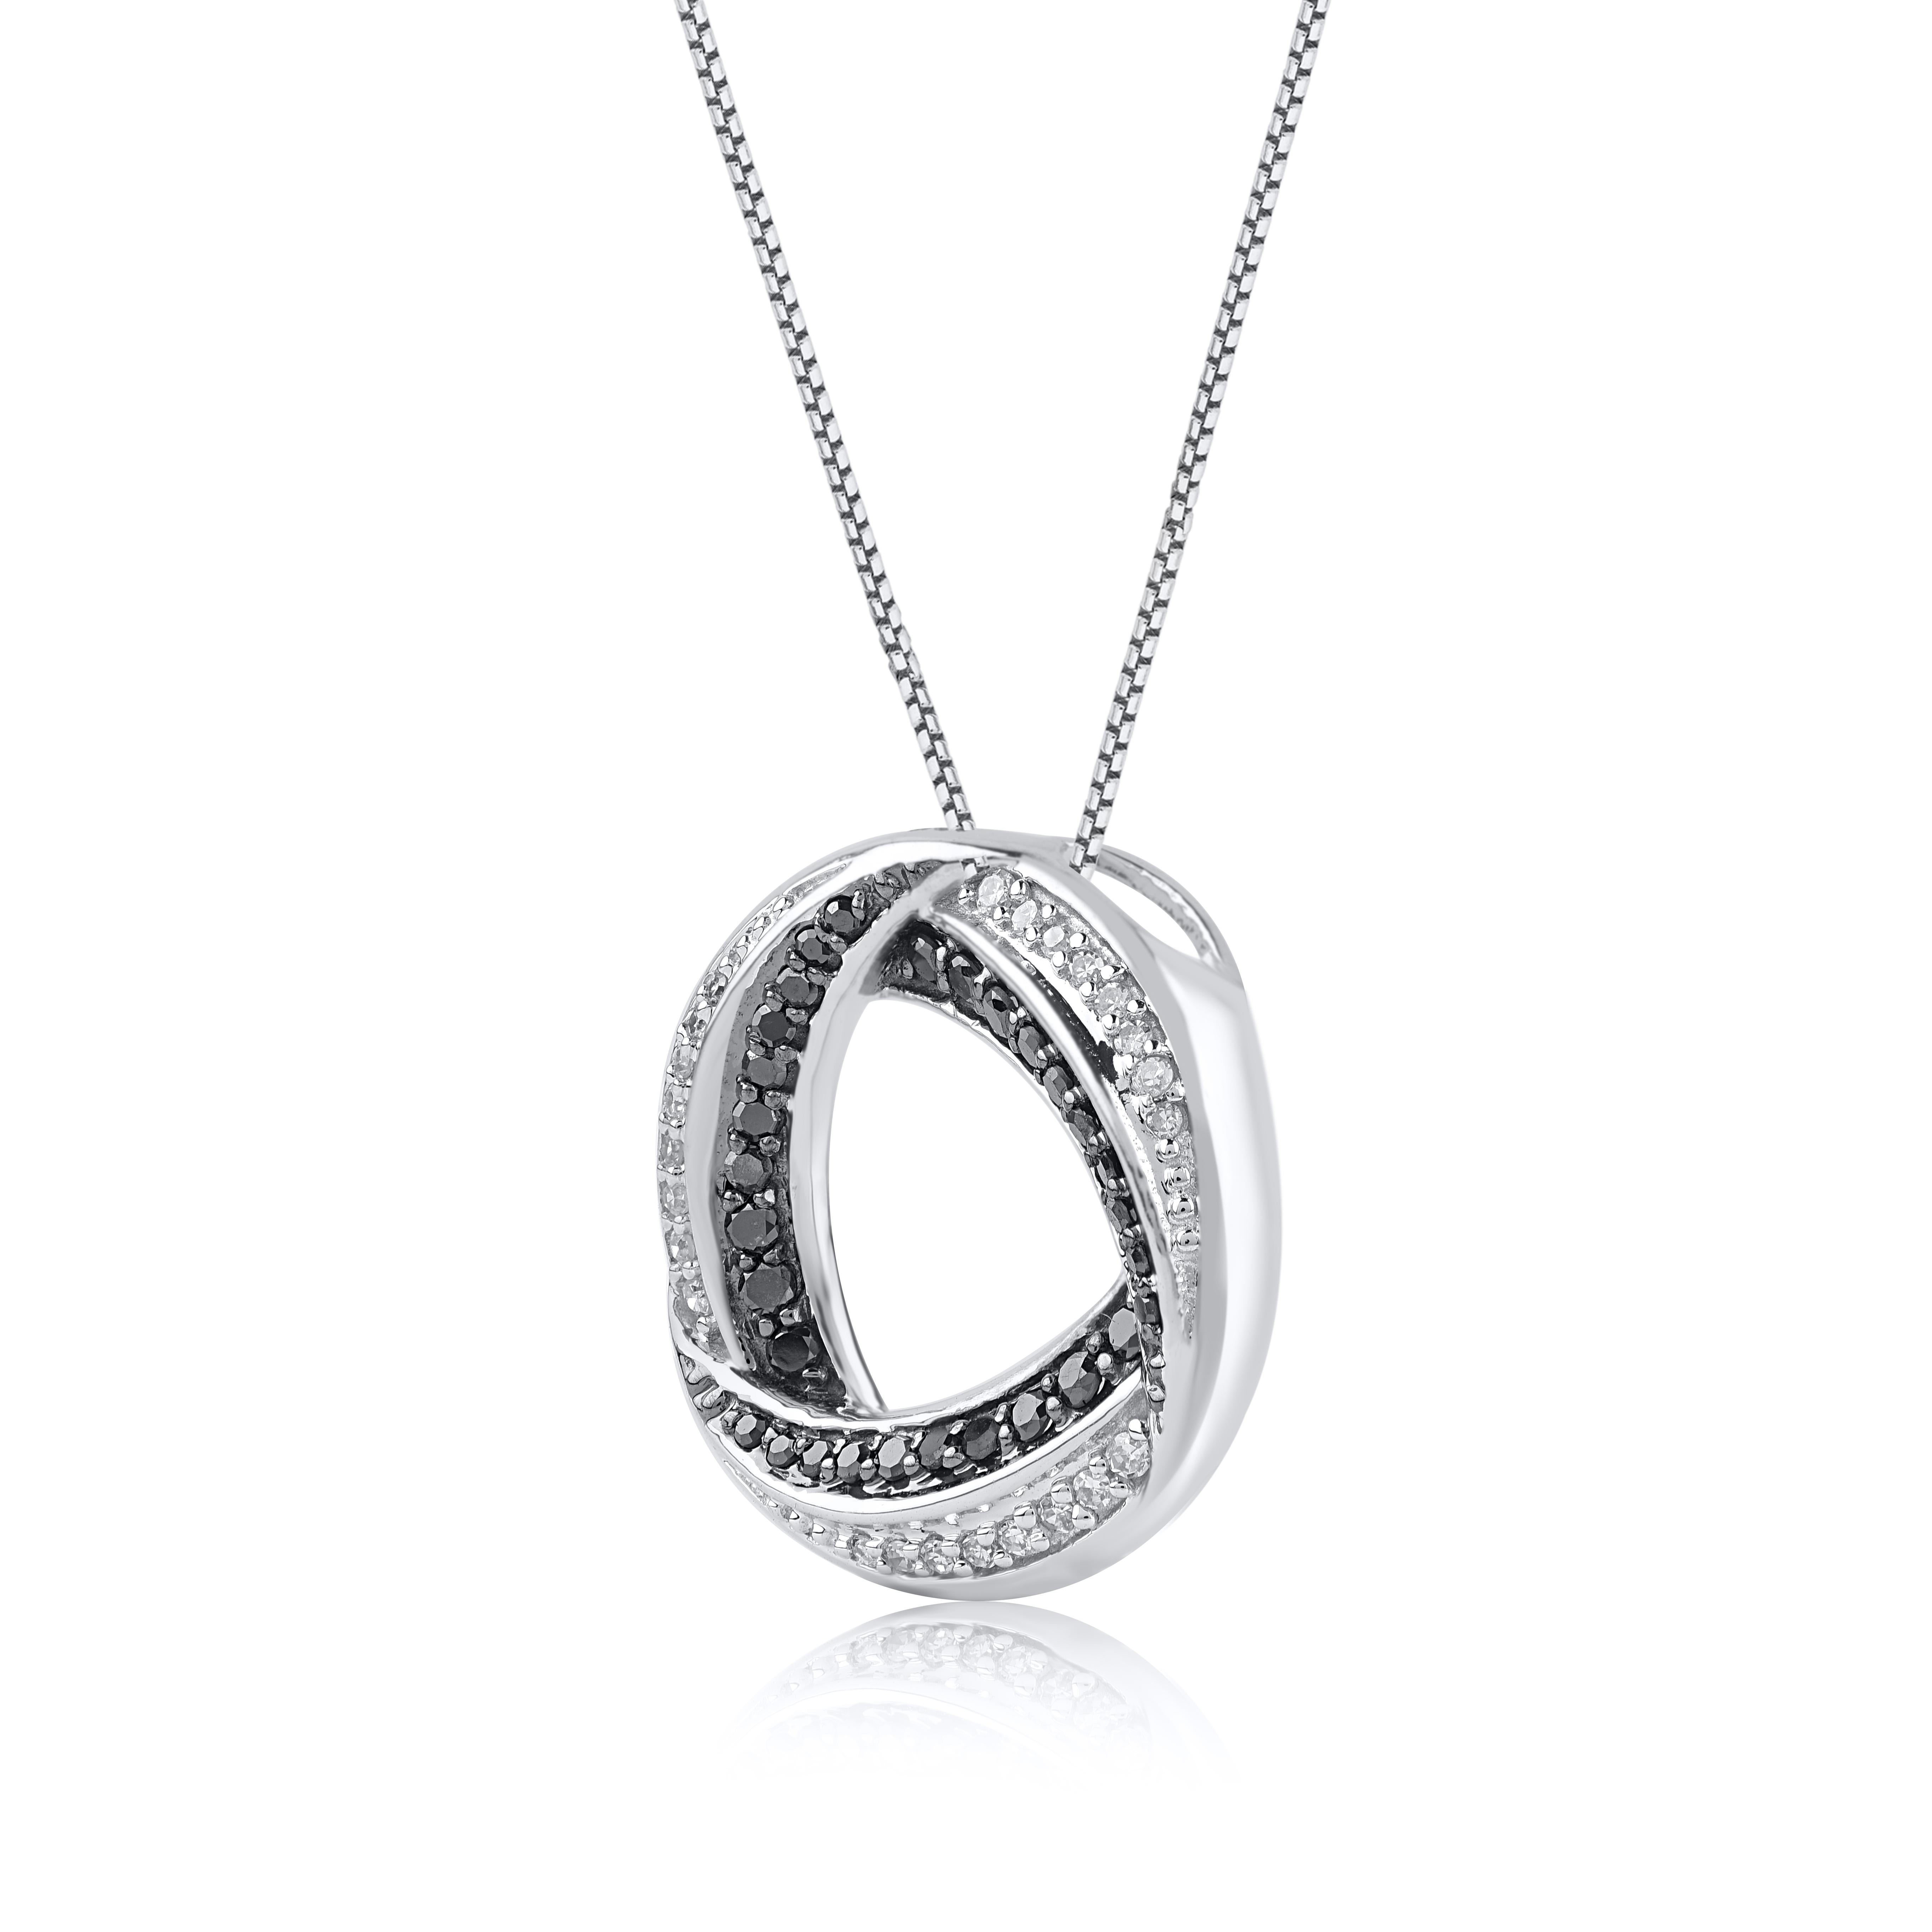 A striking addition when worn on its own, this diamond pendant makes a stunning impression. The pendant is crafted from 14-karat gold in your choice of white, rose, or yellow, and features round single cut 54 white and black treated diamonds pave